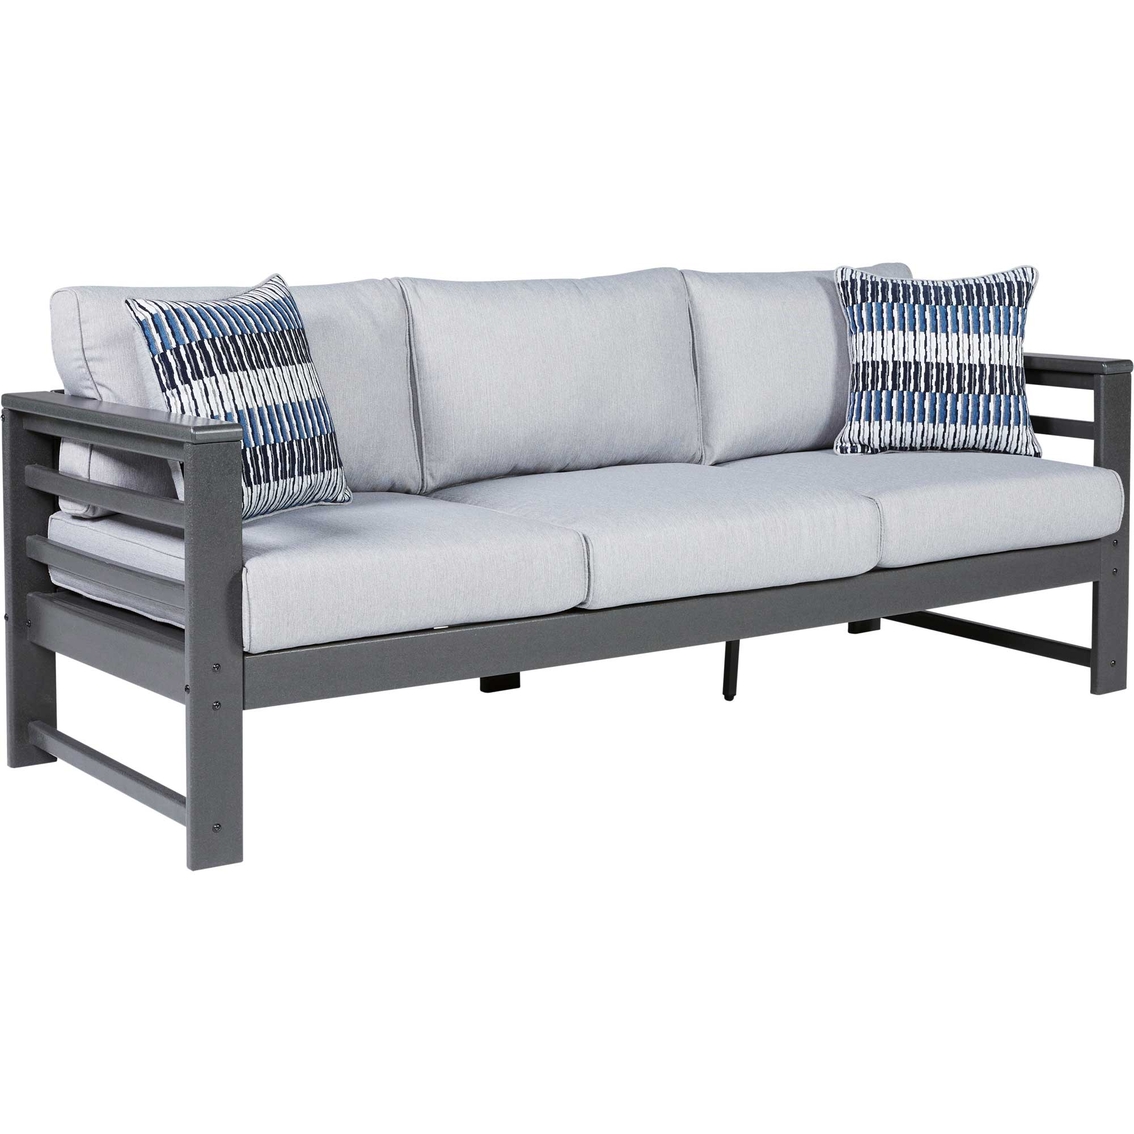 Signature Design by Ashley Amora Collection Outdoor Sofa with Cushion - Image 3 of 7